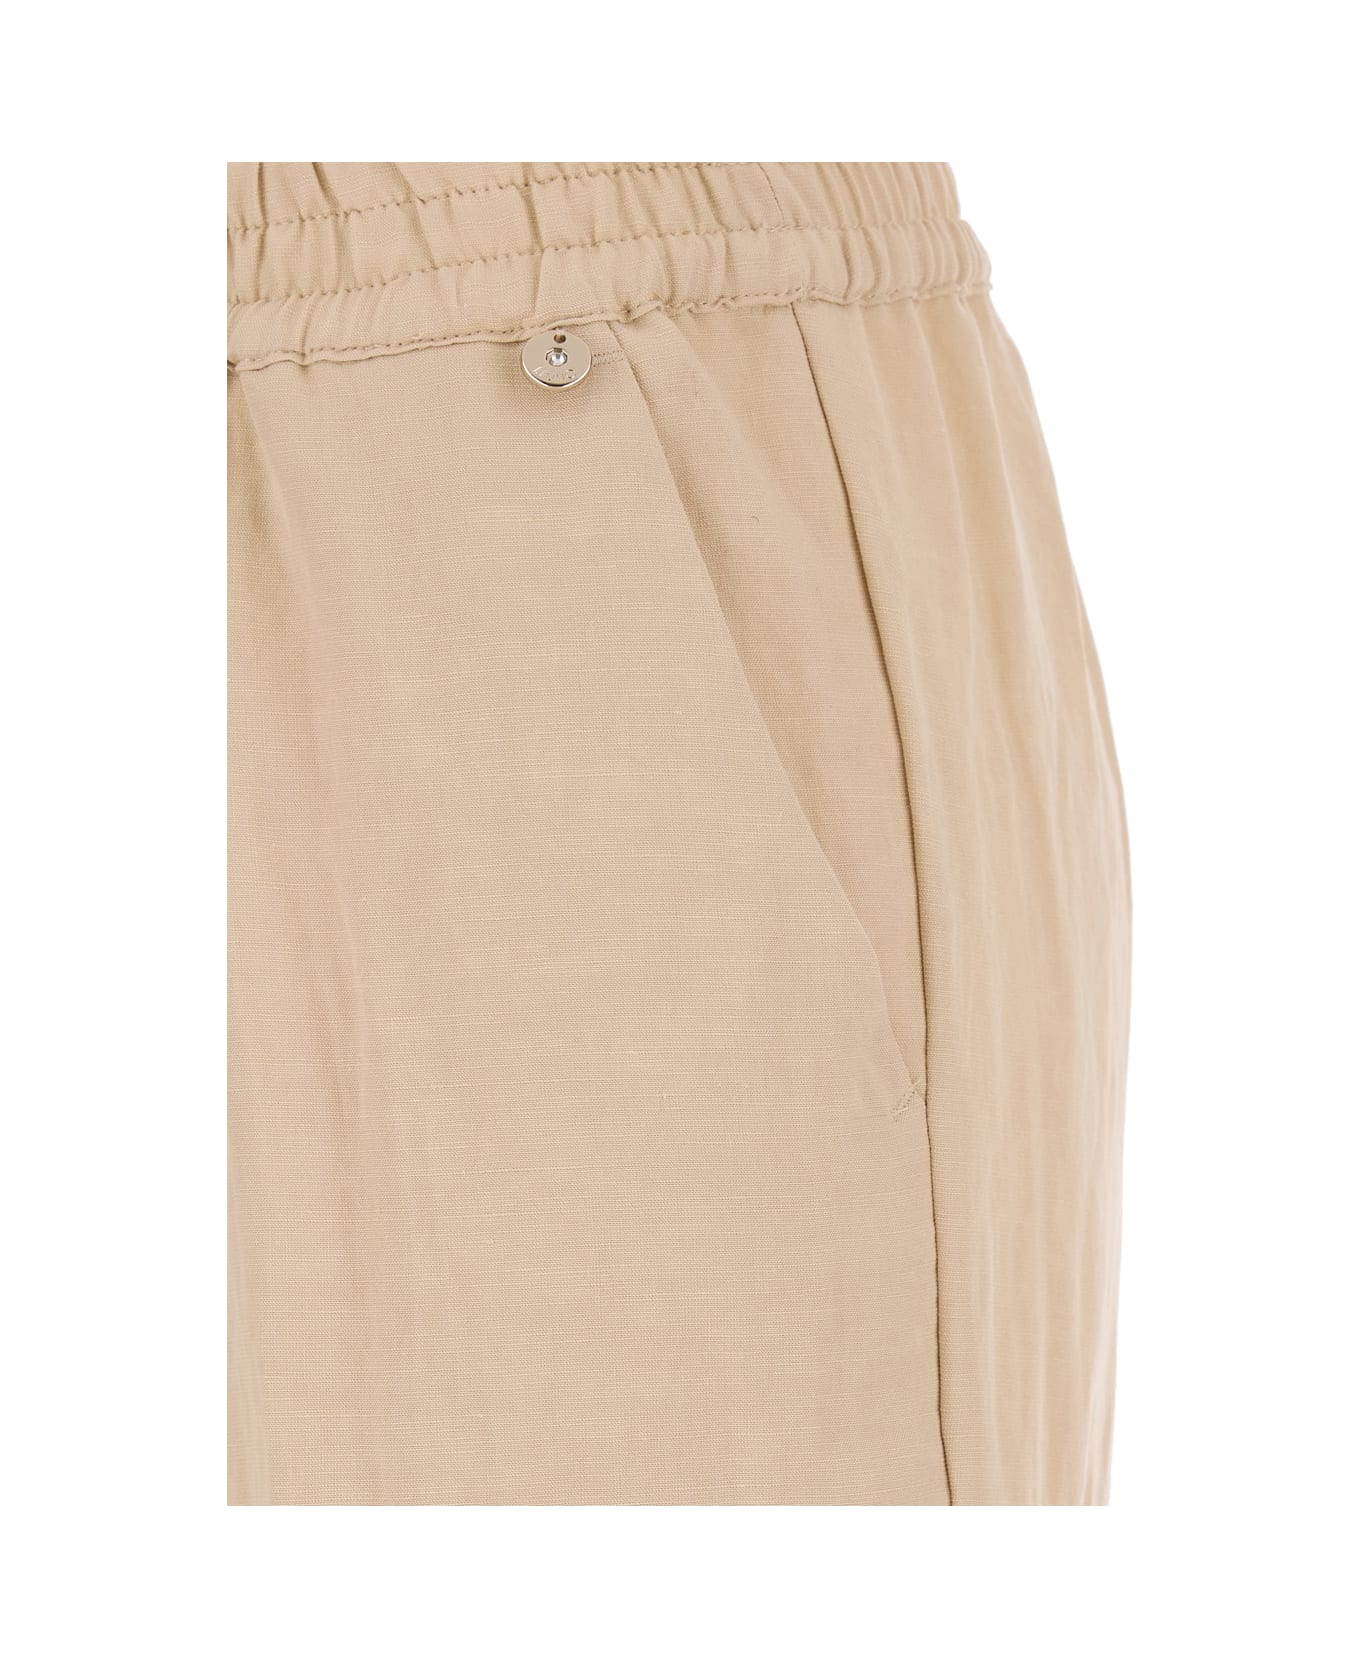 Liu-Jo Pink Trousers With Elastic Waistband In Linen Blend Woman - Beige